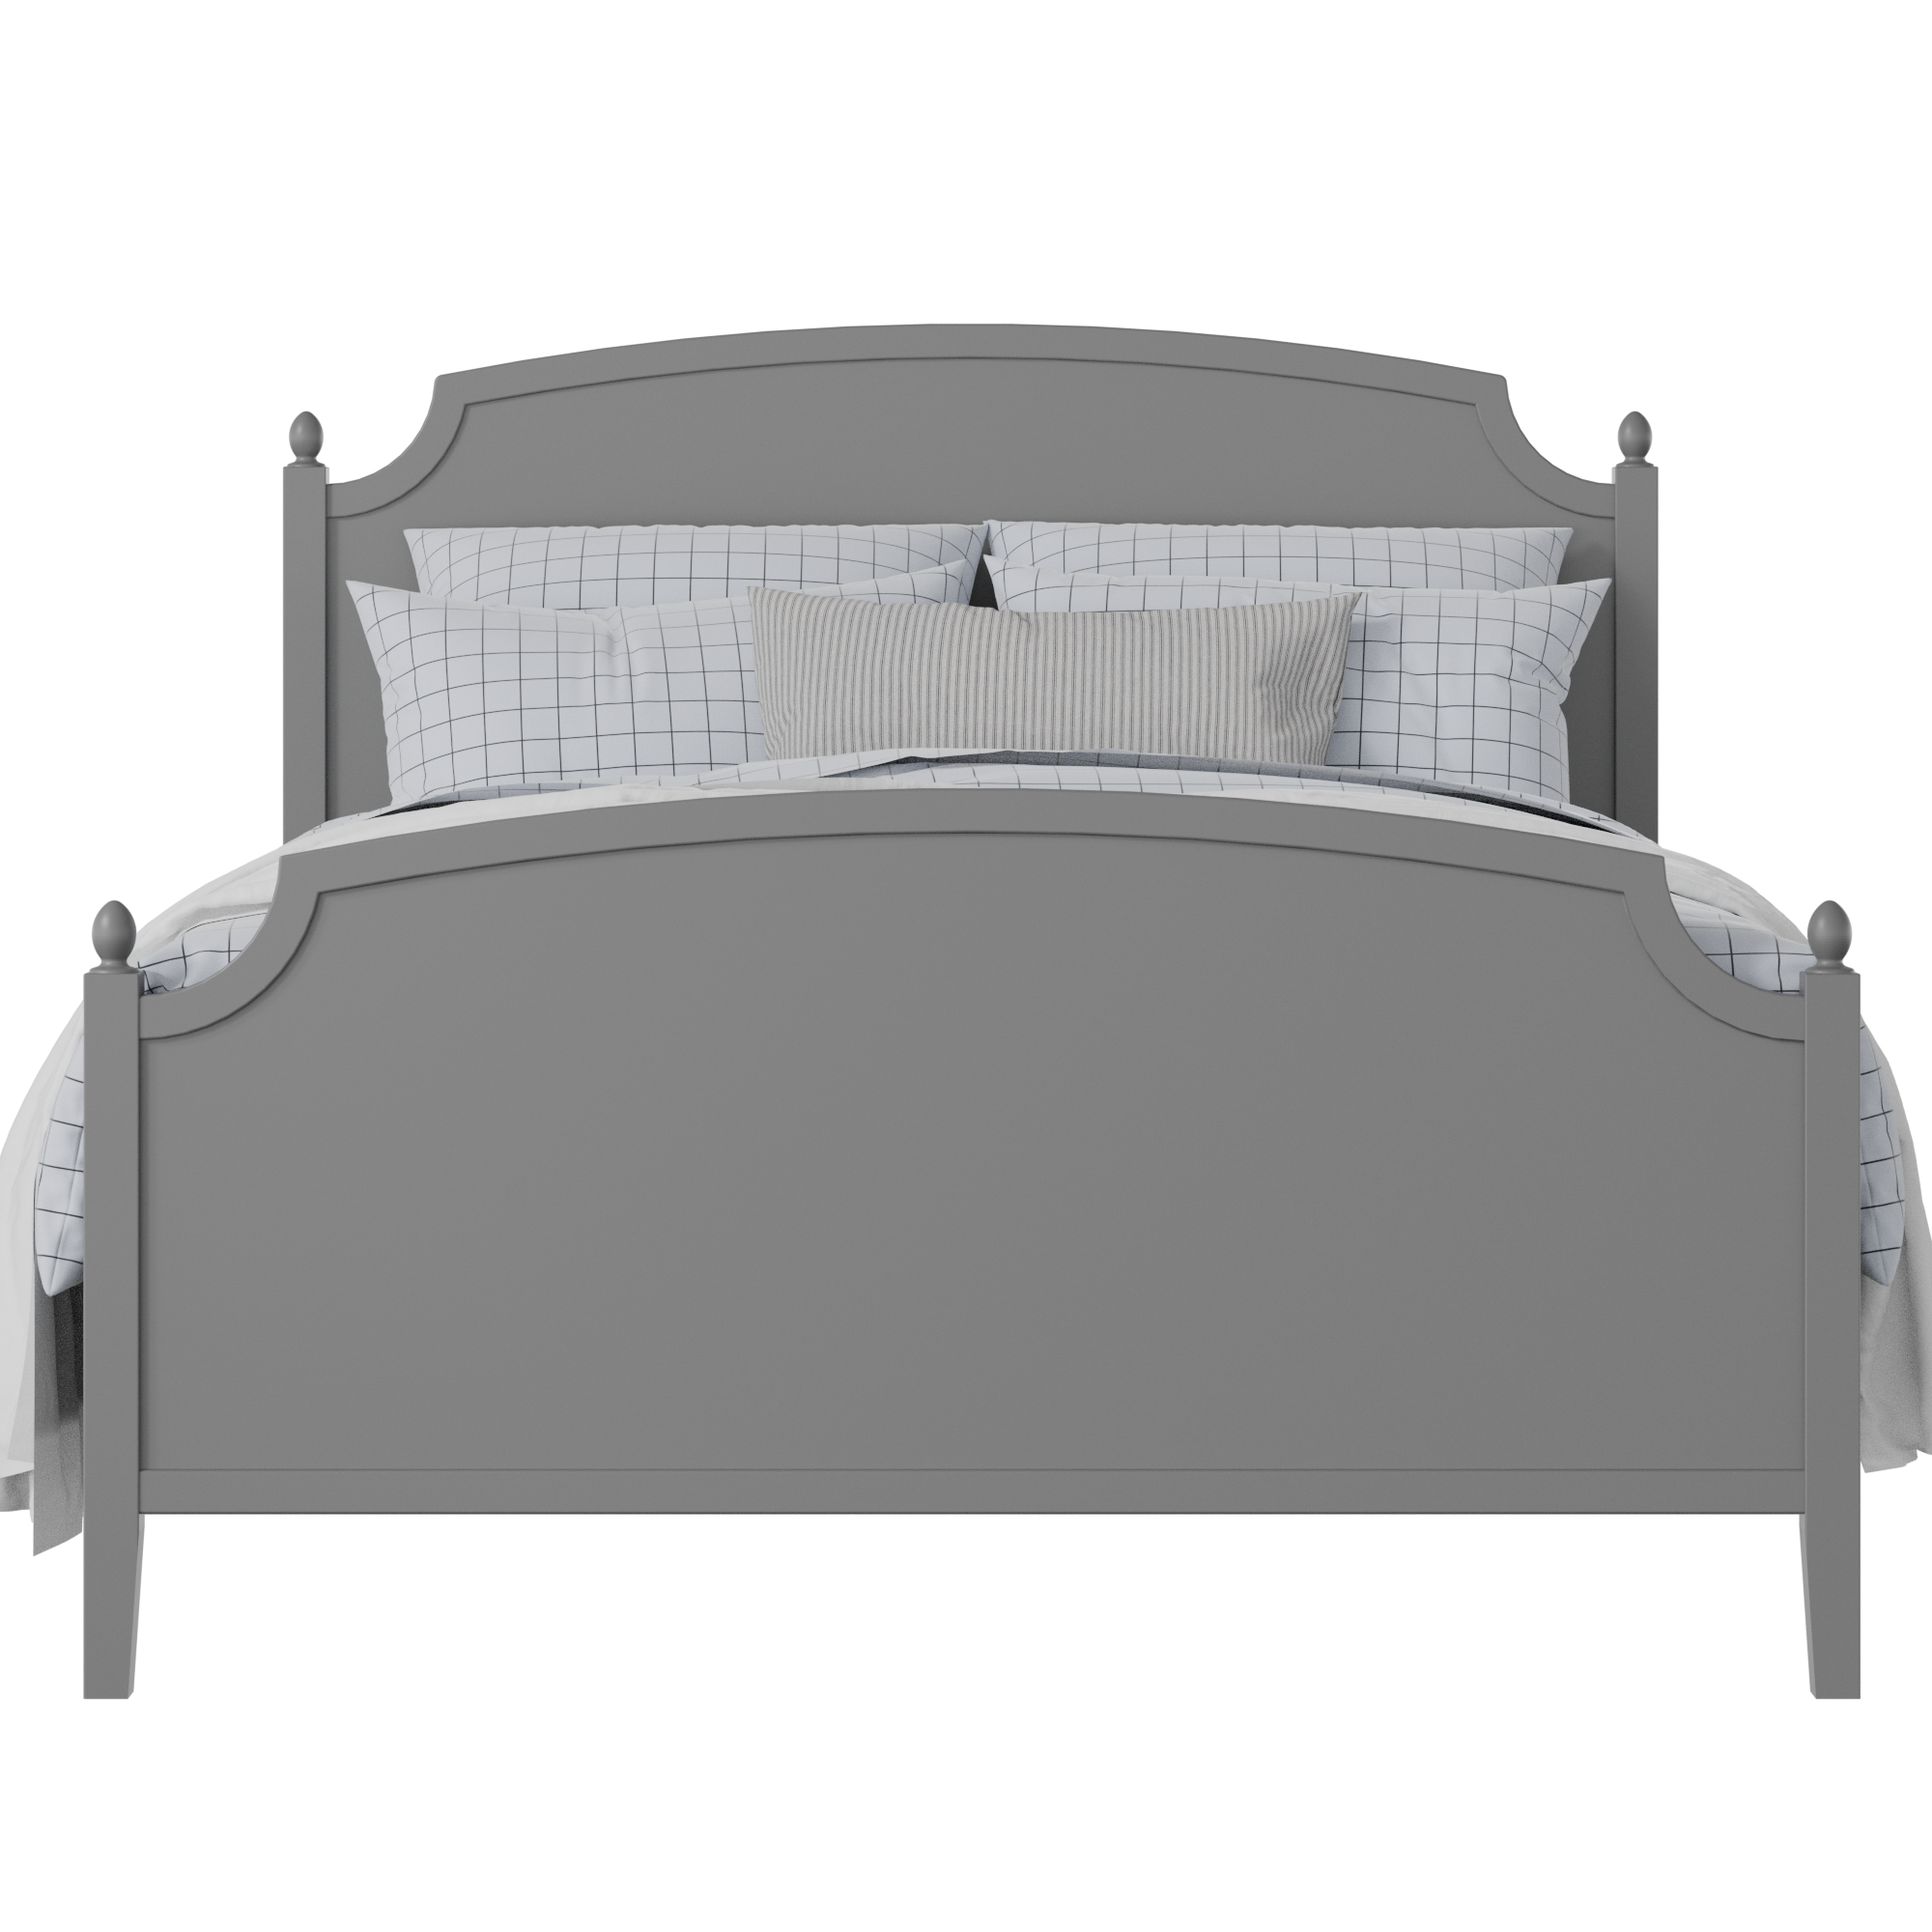 Kipling Painted painted wood bed in grey with Juno mattress